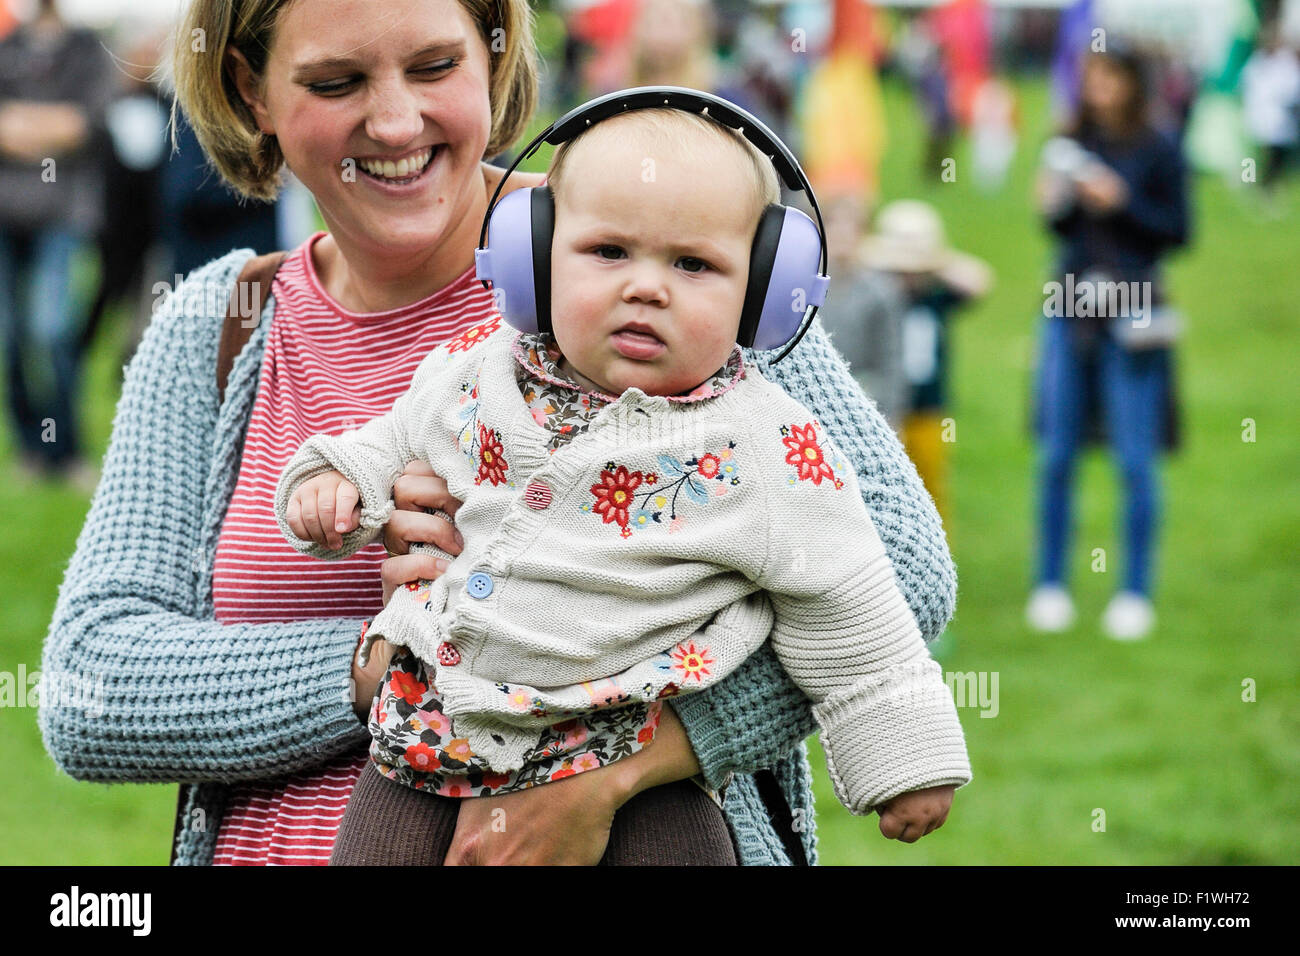 Maude, aged 11 months enjoying herself at Together The People Festival in Brighton. Stock Photo